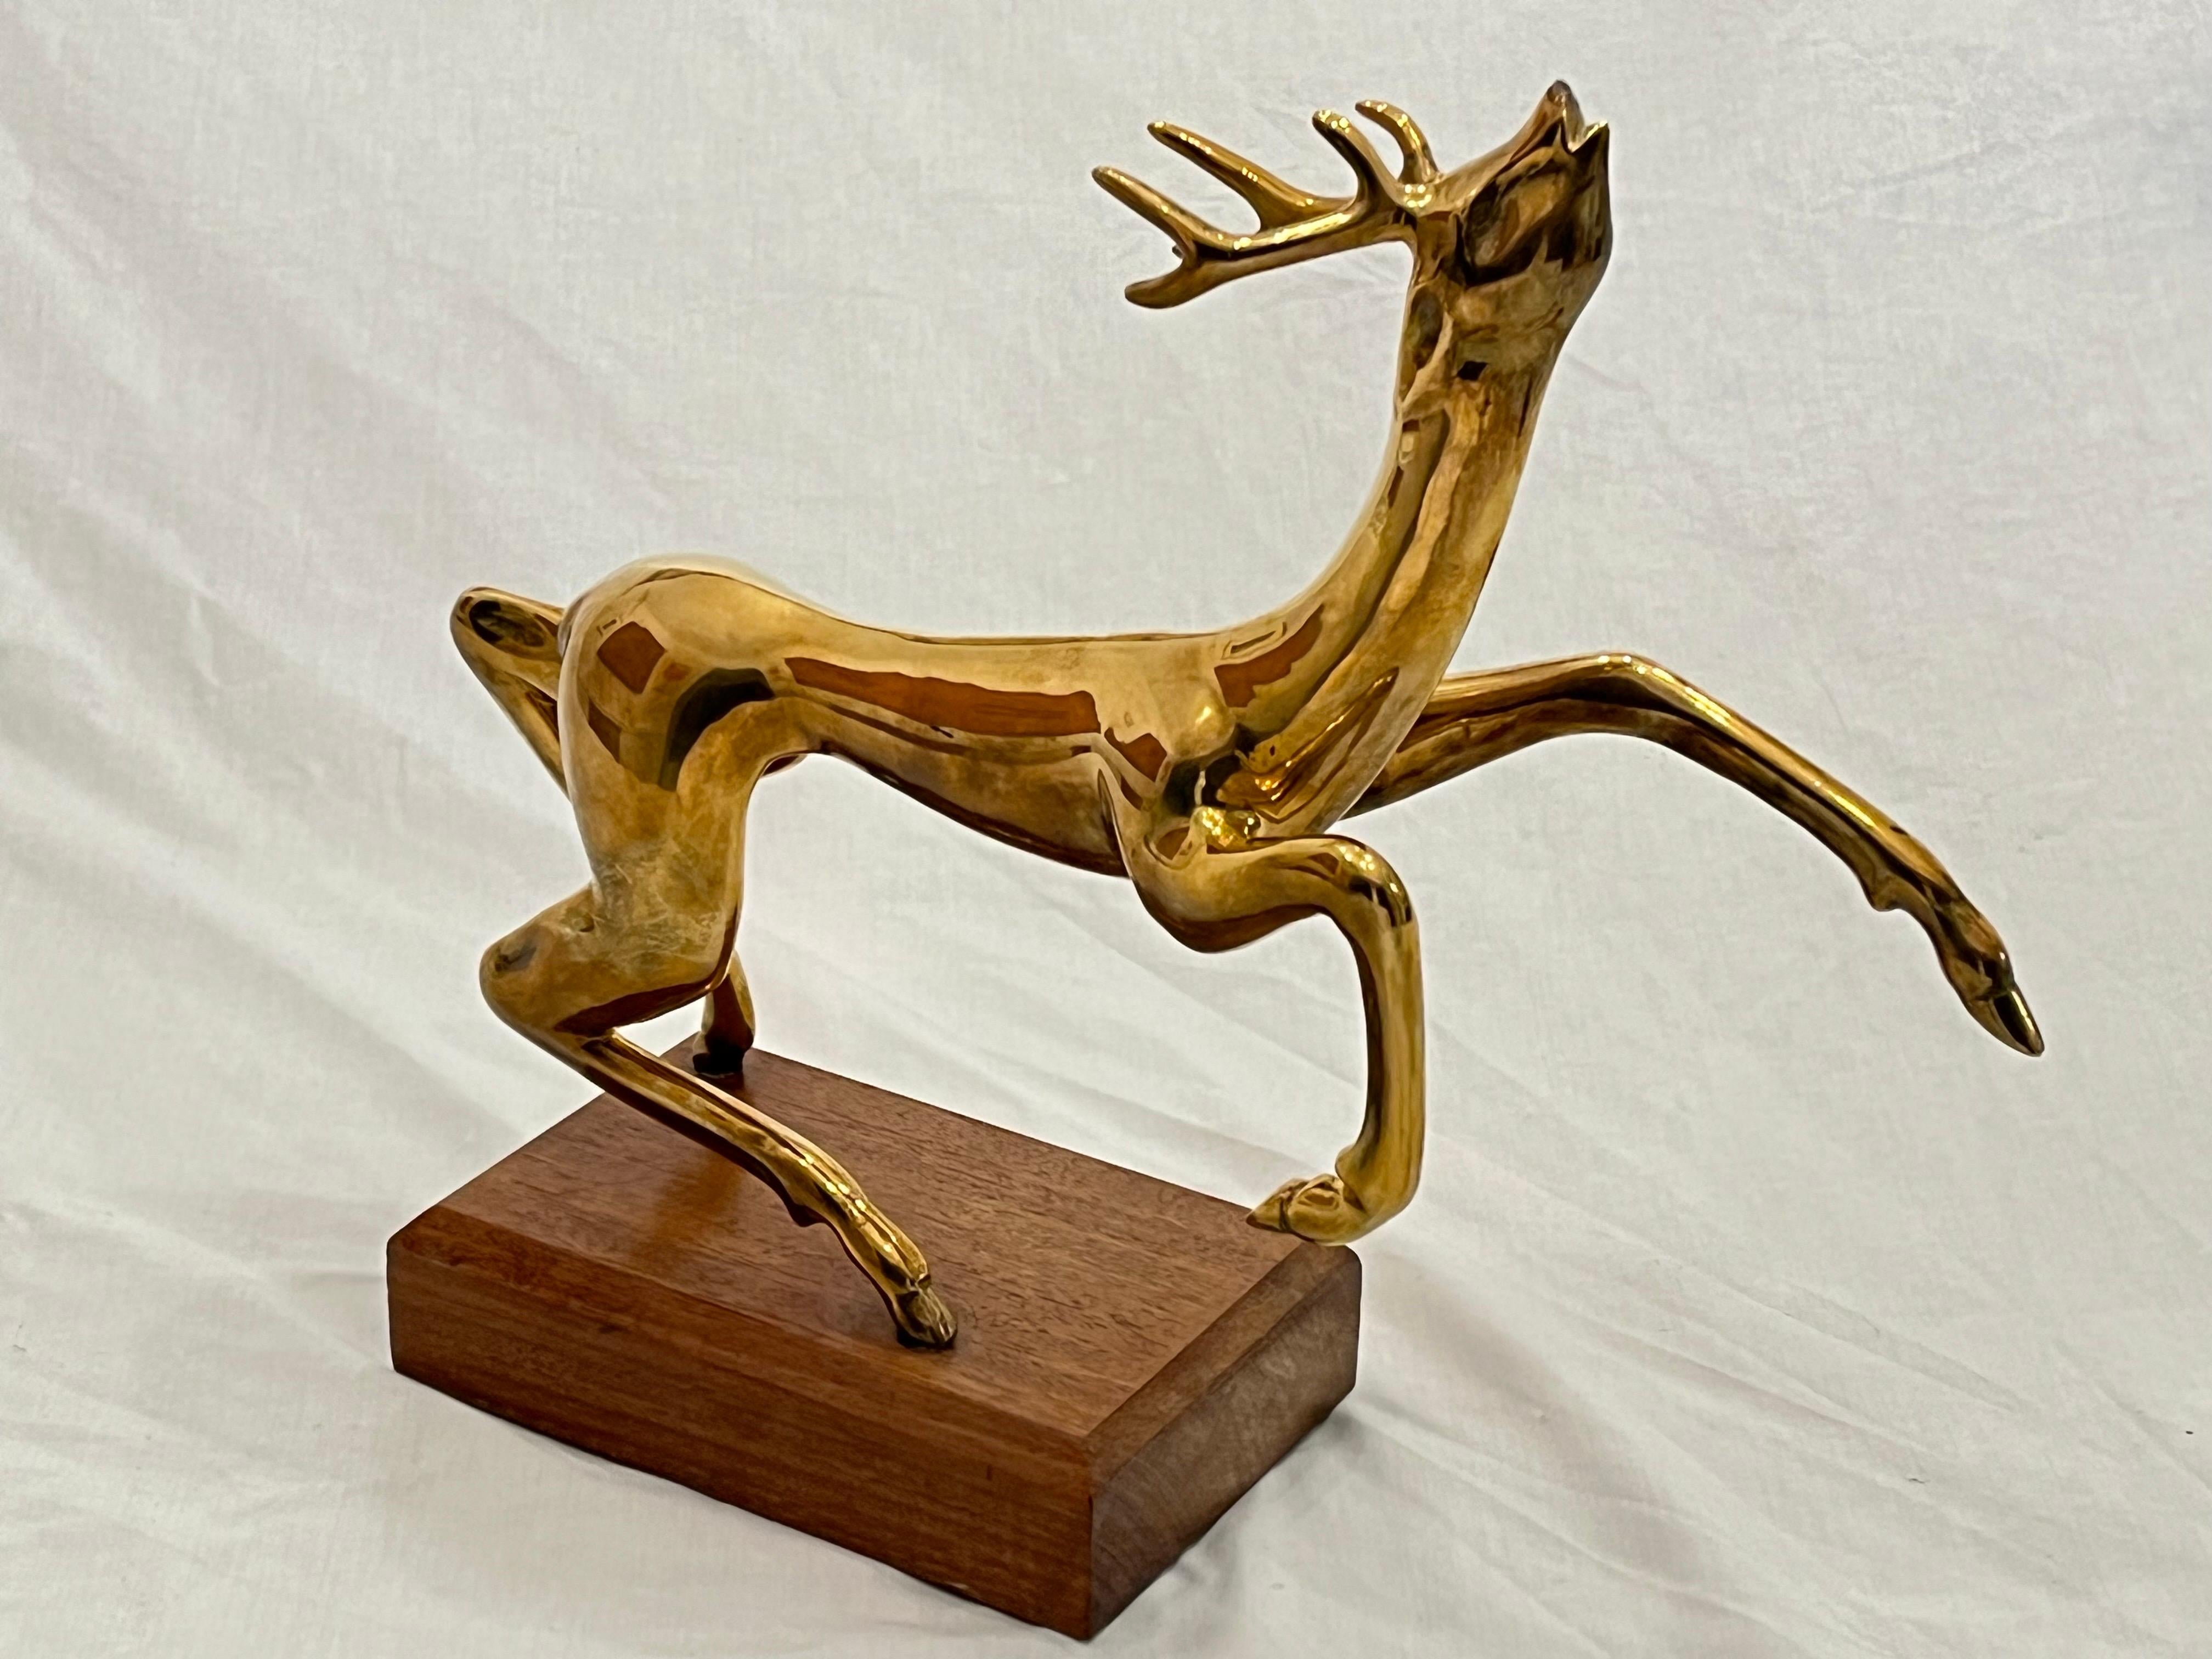 20th Century Vintage Thai Somchai Hattakitkosol Signed Solid Bronze Sculpture of Leaping Deer For Sale